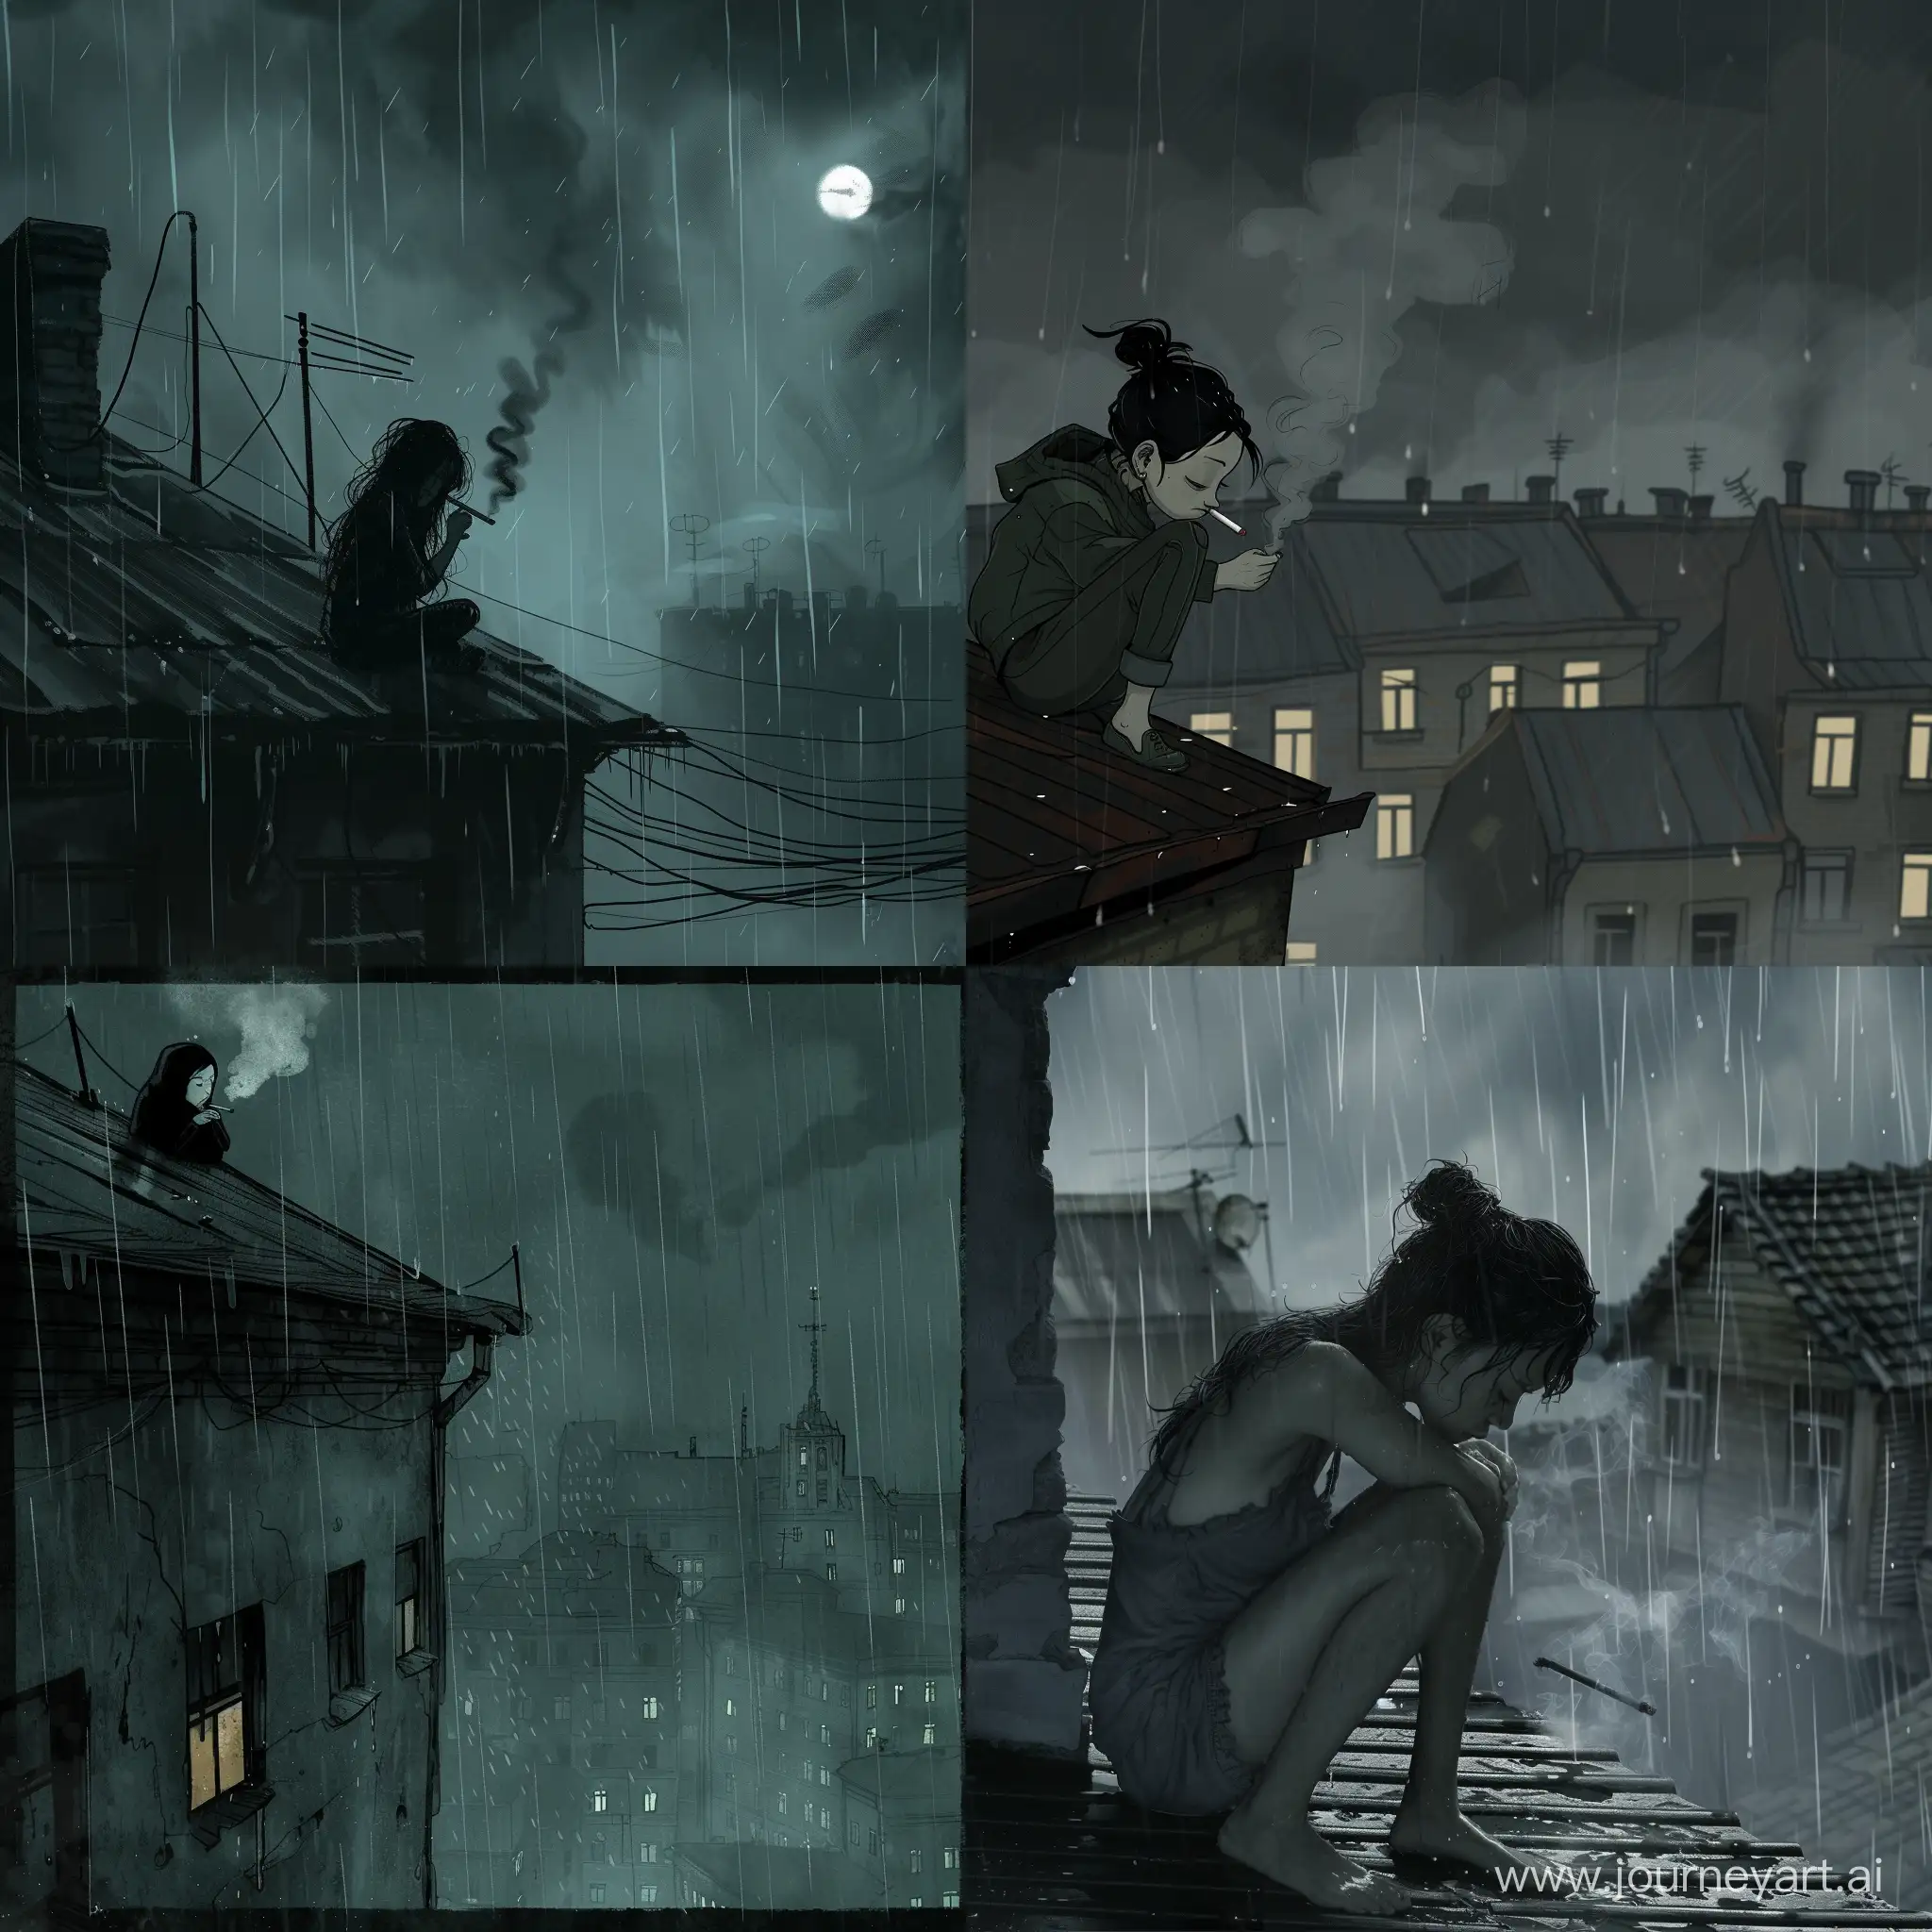 depressive Soviet panels in the rain with a smoking sad girl on the roof